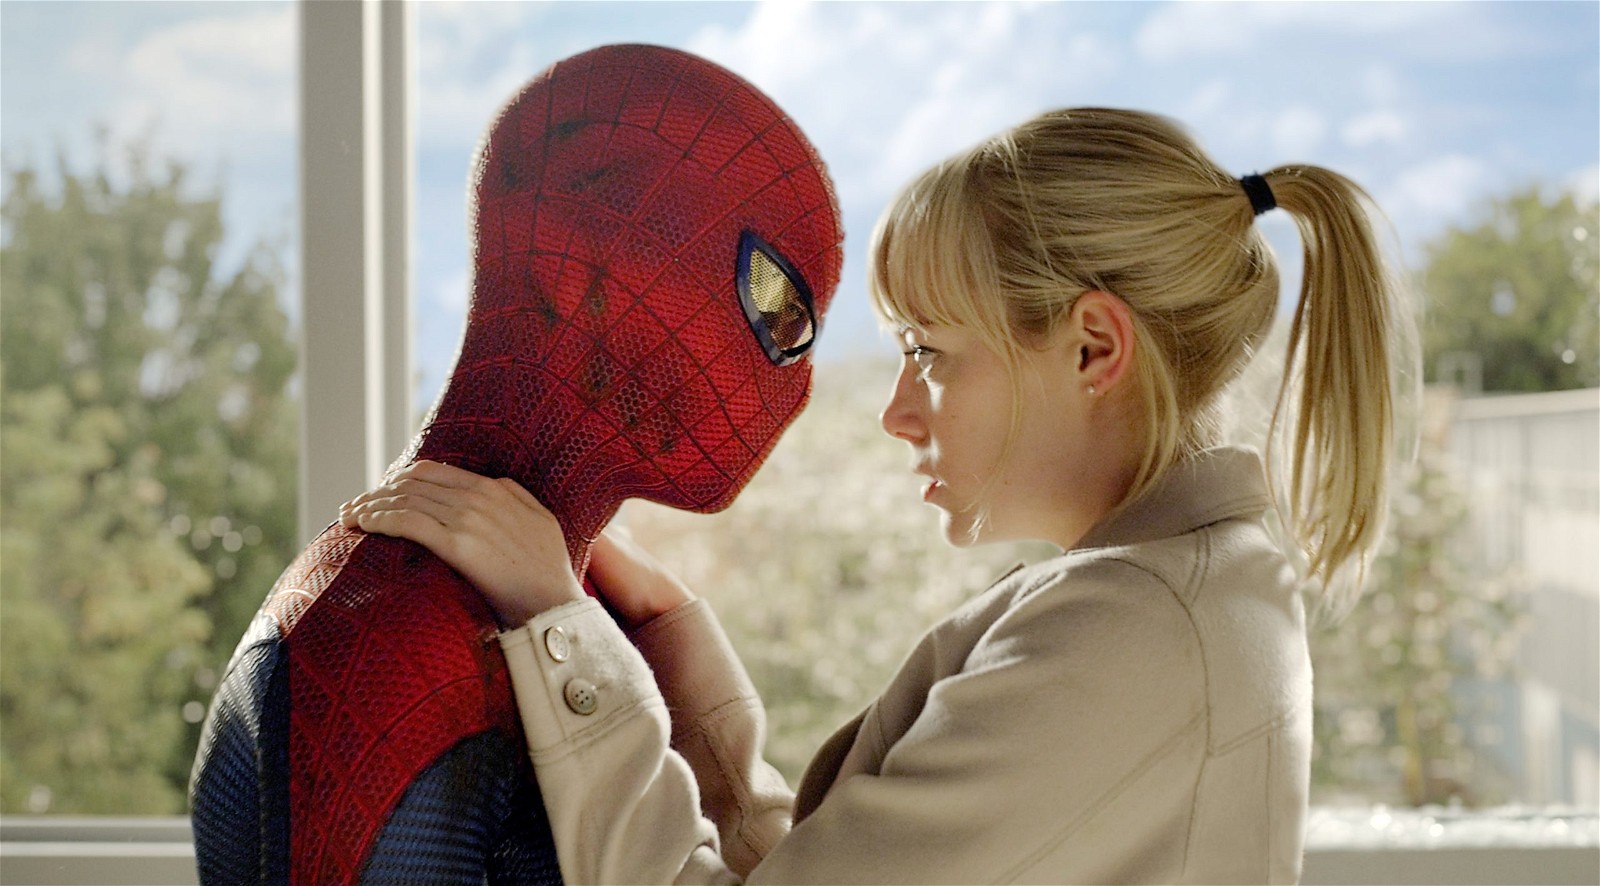 Andrew Garfield and Emma Stone in a still from The Amazing Spider-Man